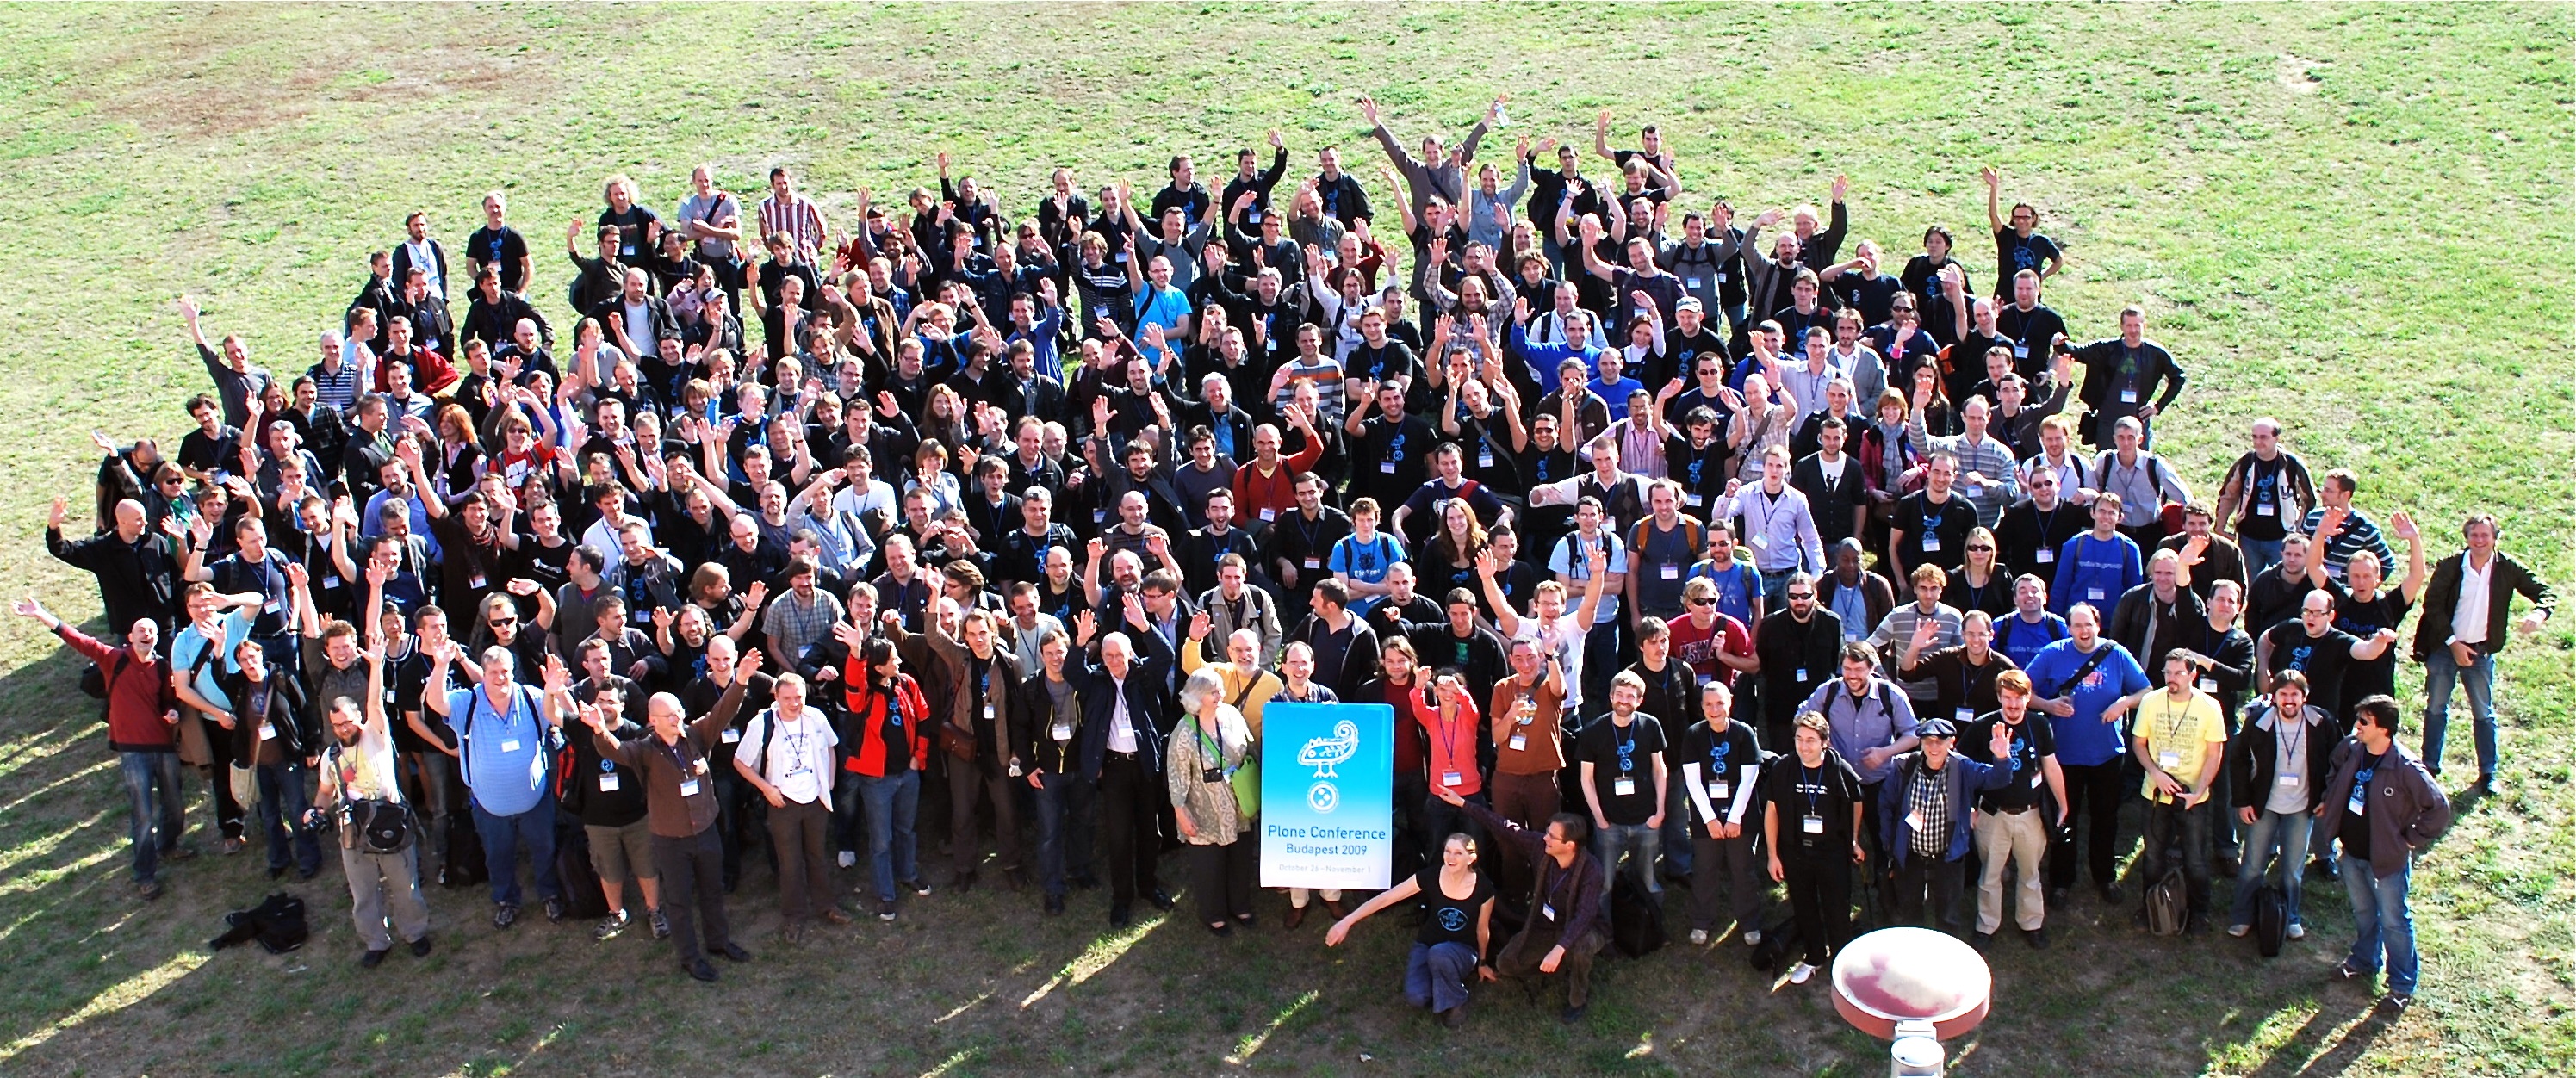 Group Picture of Plone Conference 2009